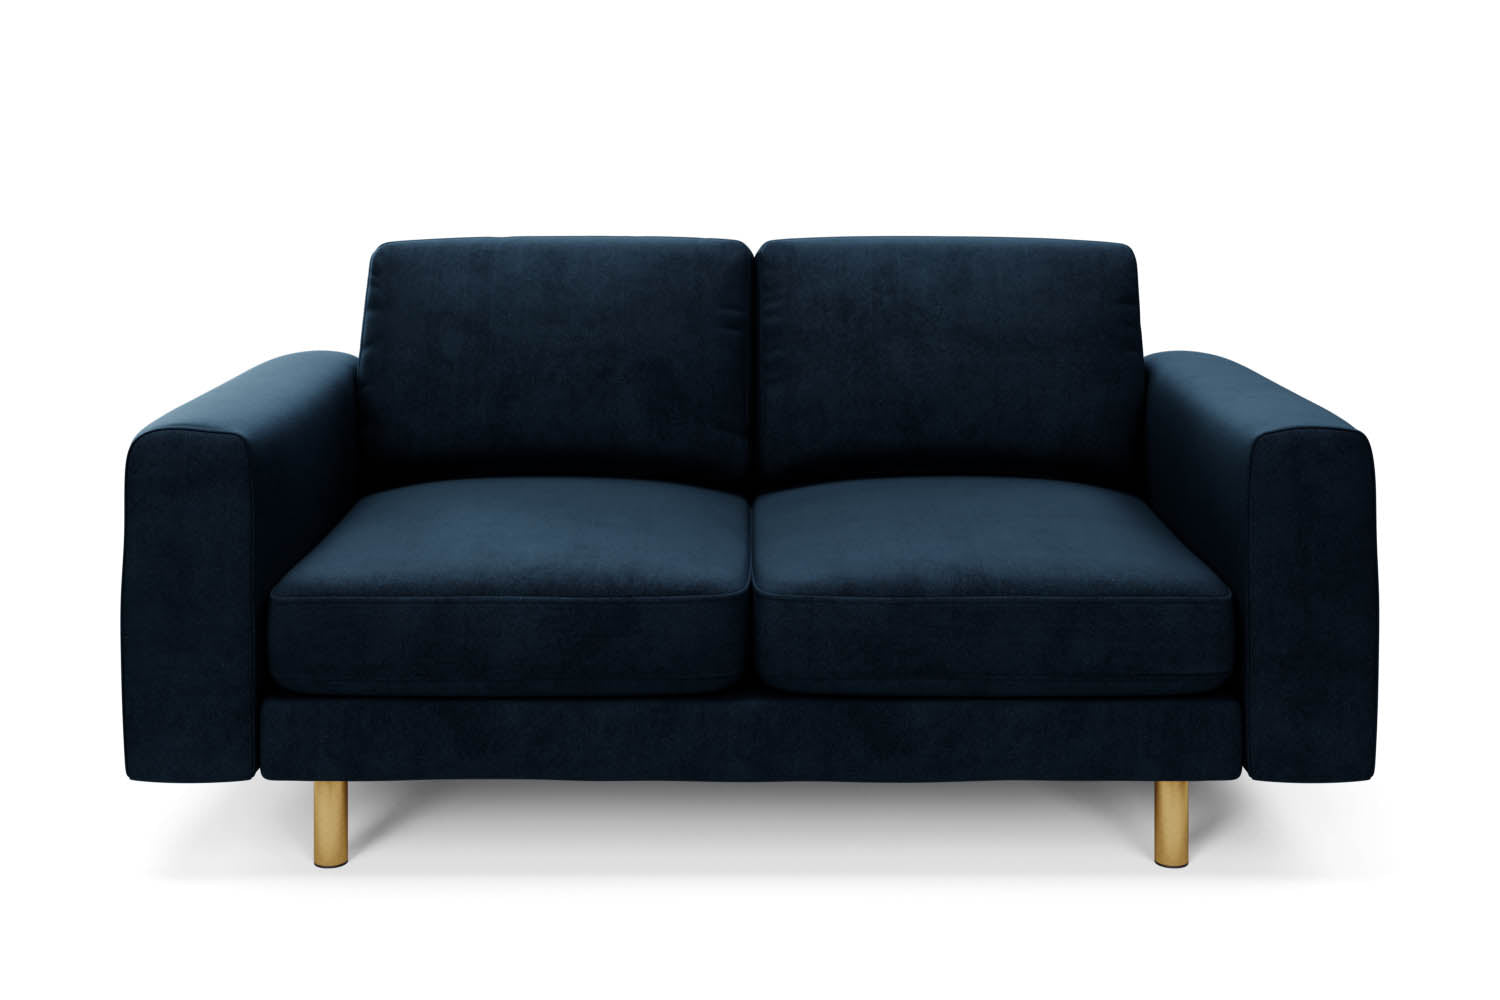 SNUG | The Big Chill 2 Seater Sofa in Deep Blue variant_40837173805104